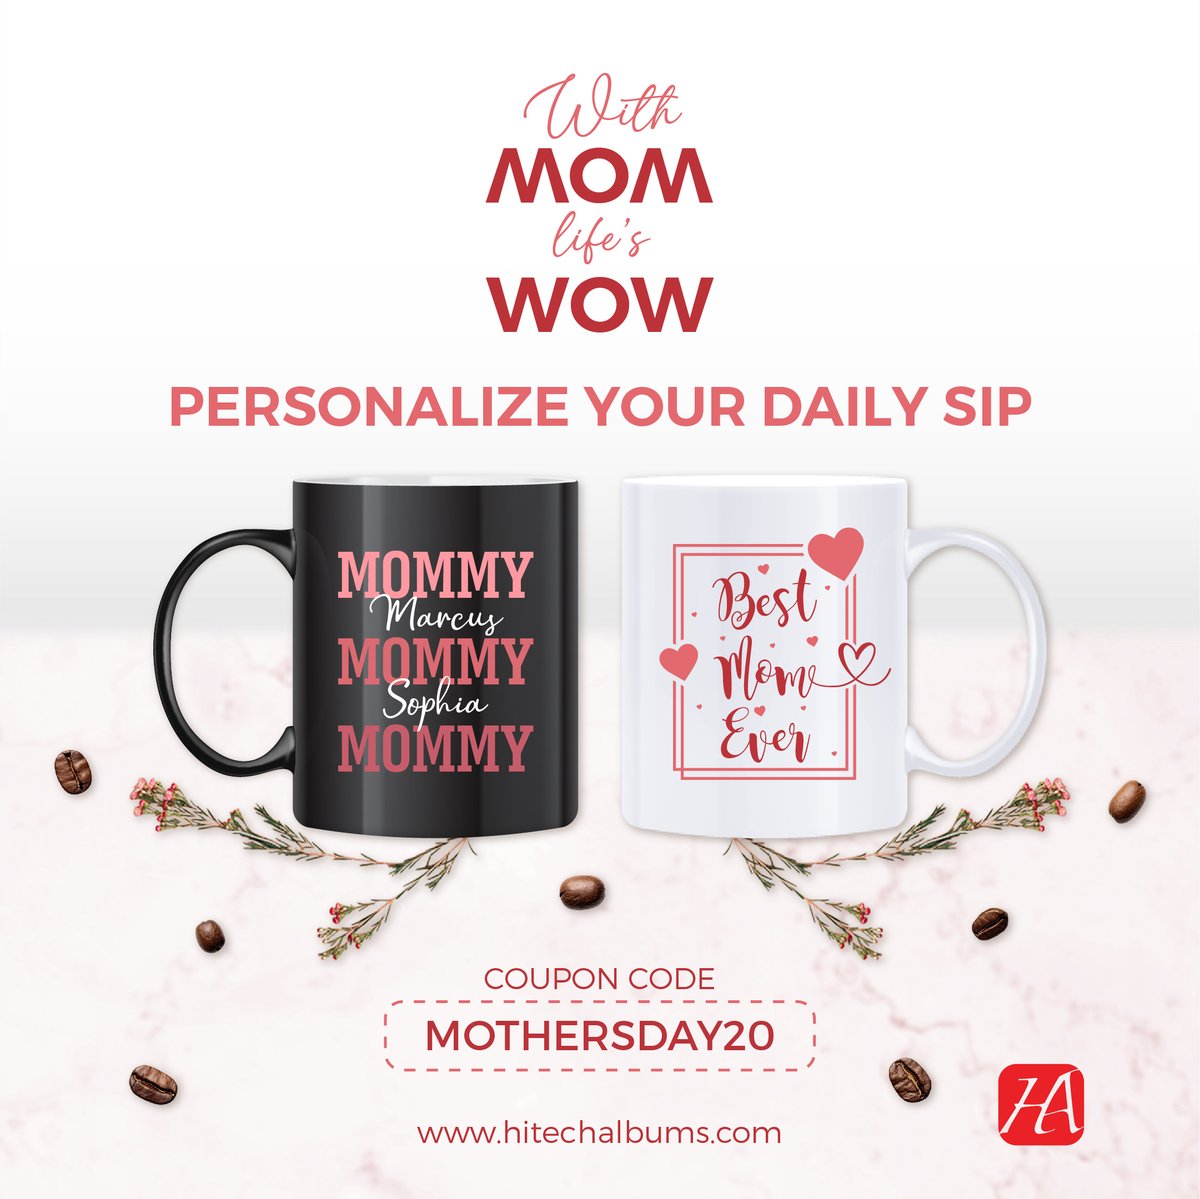 Personalize your Mom's Daily Sip with @Hitech Albums  Use coupon code. LINK IN BIO.
.
.
#personalisedmug #giftideas #giftformom #mothersdaygift #coffeemugs #loveformom #giftforher #giftforhim #customgiftideas #offers